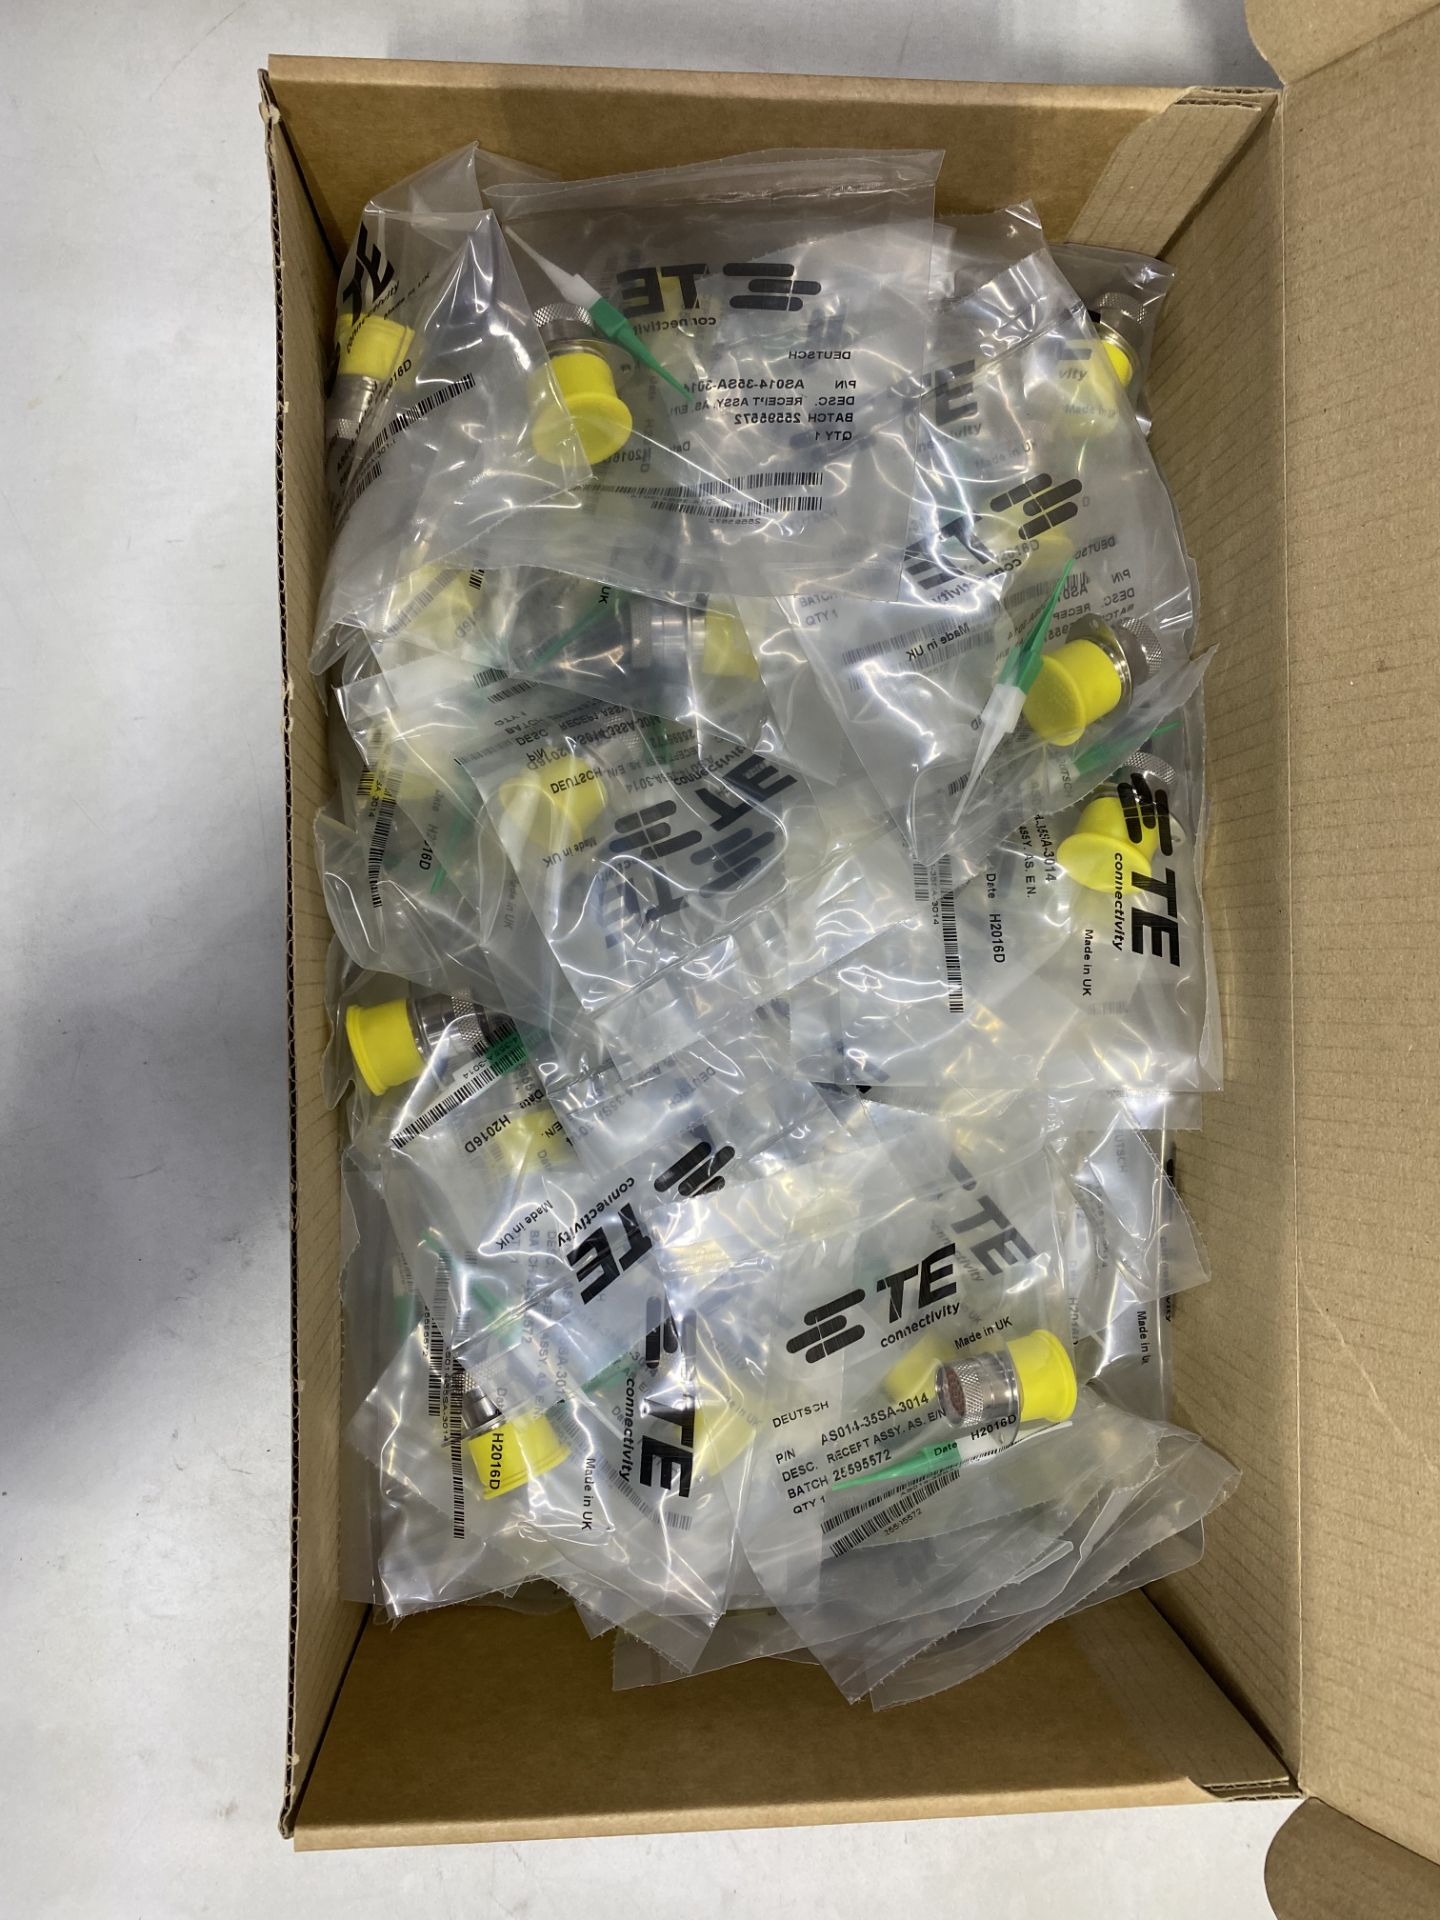 Approximately 2,600 x TE Connectivity AS014-35SA/PN Ventilator Plug Connectors - Image 3 of 3